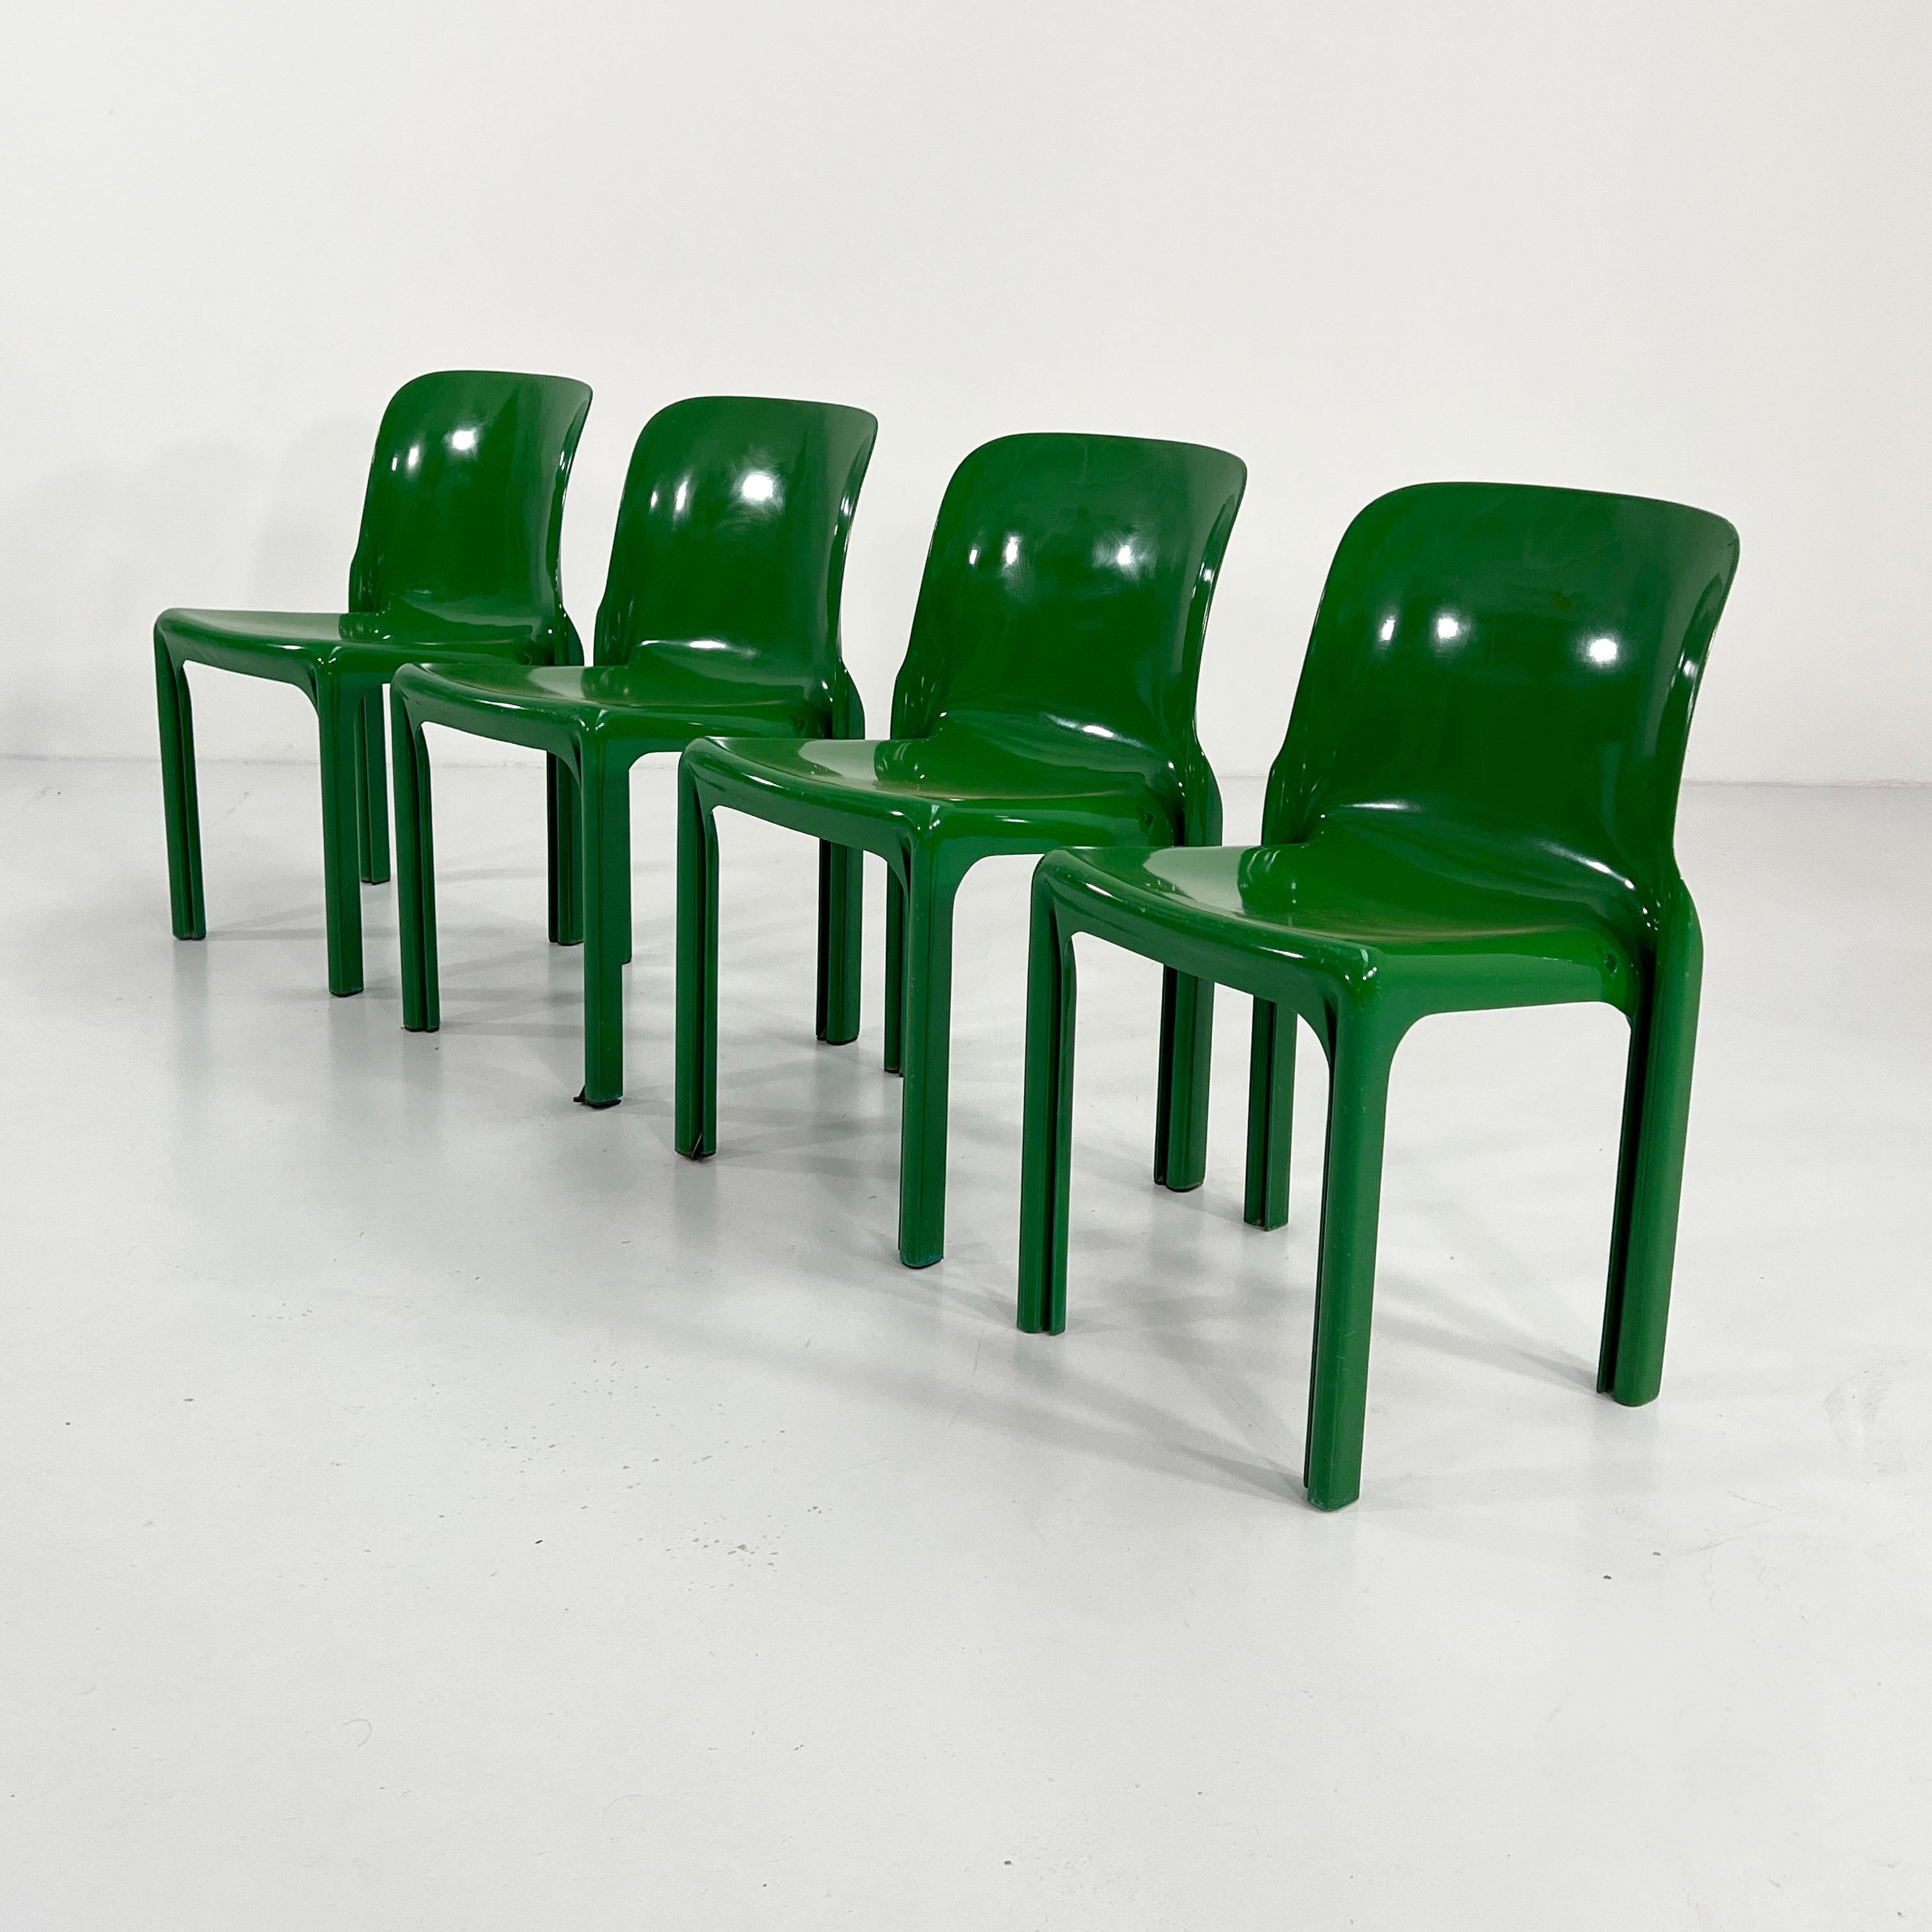 Designer - Vico Magistretti
Producer - Artemide
Model - Selene Chair
Design Period - Seventies
Measurements - Width 47 cm x Depth 50 cm x Height 76 cm x Seat Height 48 cm
Materials - Plastic
Color - Green
Comments - Light wear consistent with age